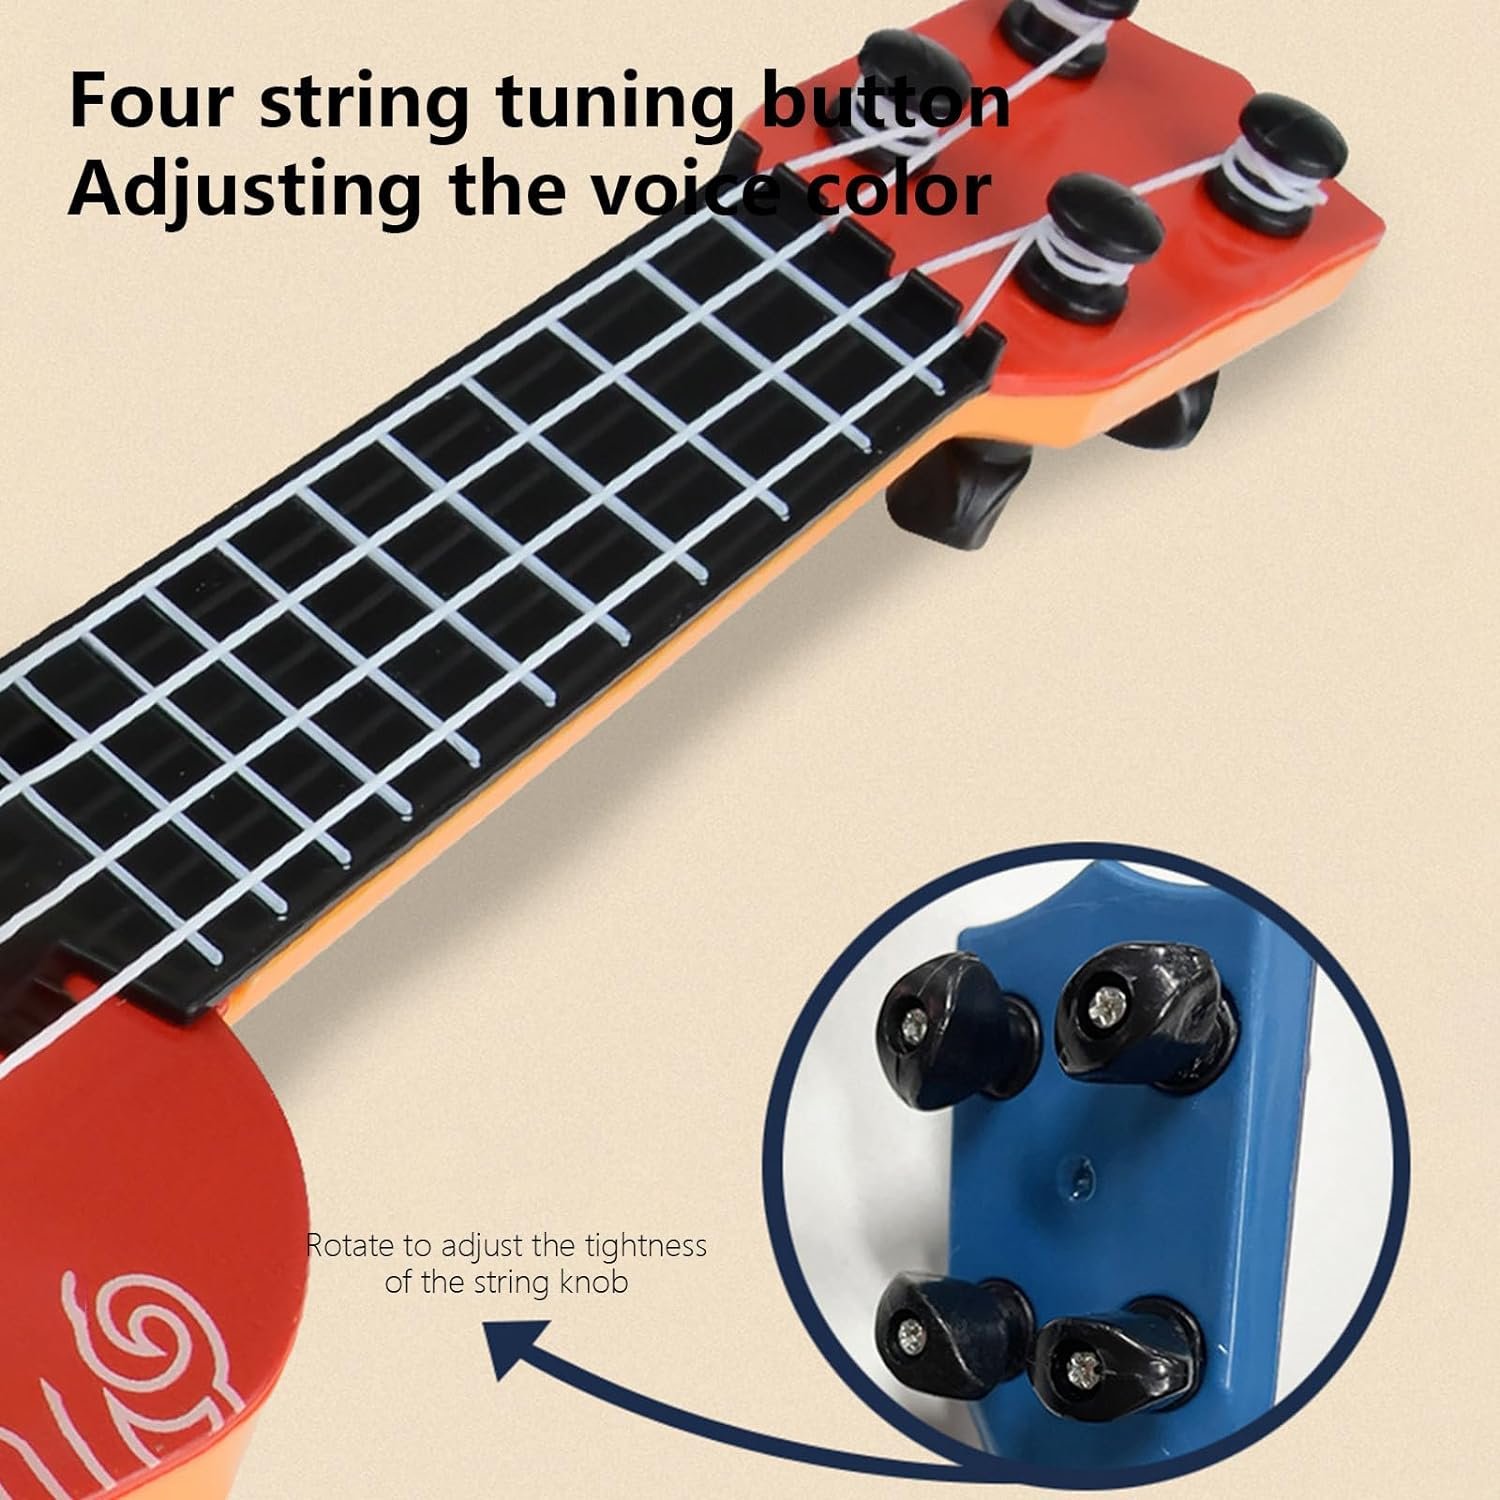 Ukulele Toy for Children, Beginner Simulation Instrument, Enlightenment Music Toy, Kids Beginners Guitar Musical Instrument, Early Educational Learning Musical Instrument Gift for Age 3+ (C)